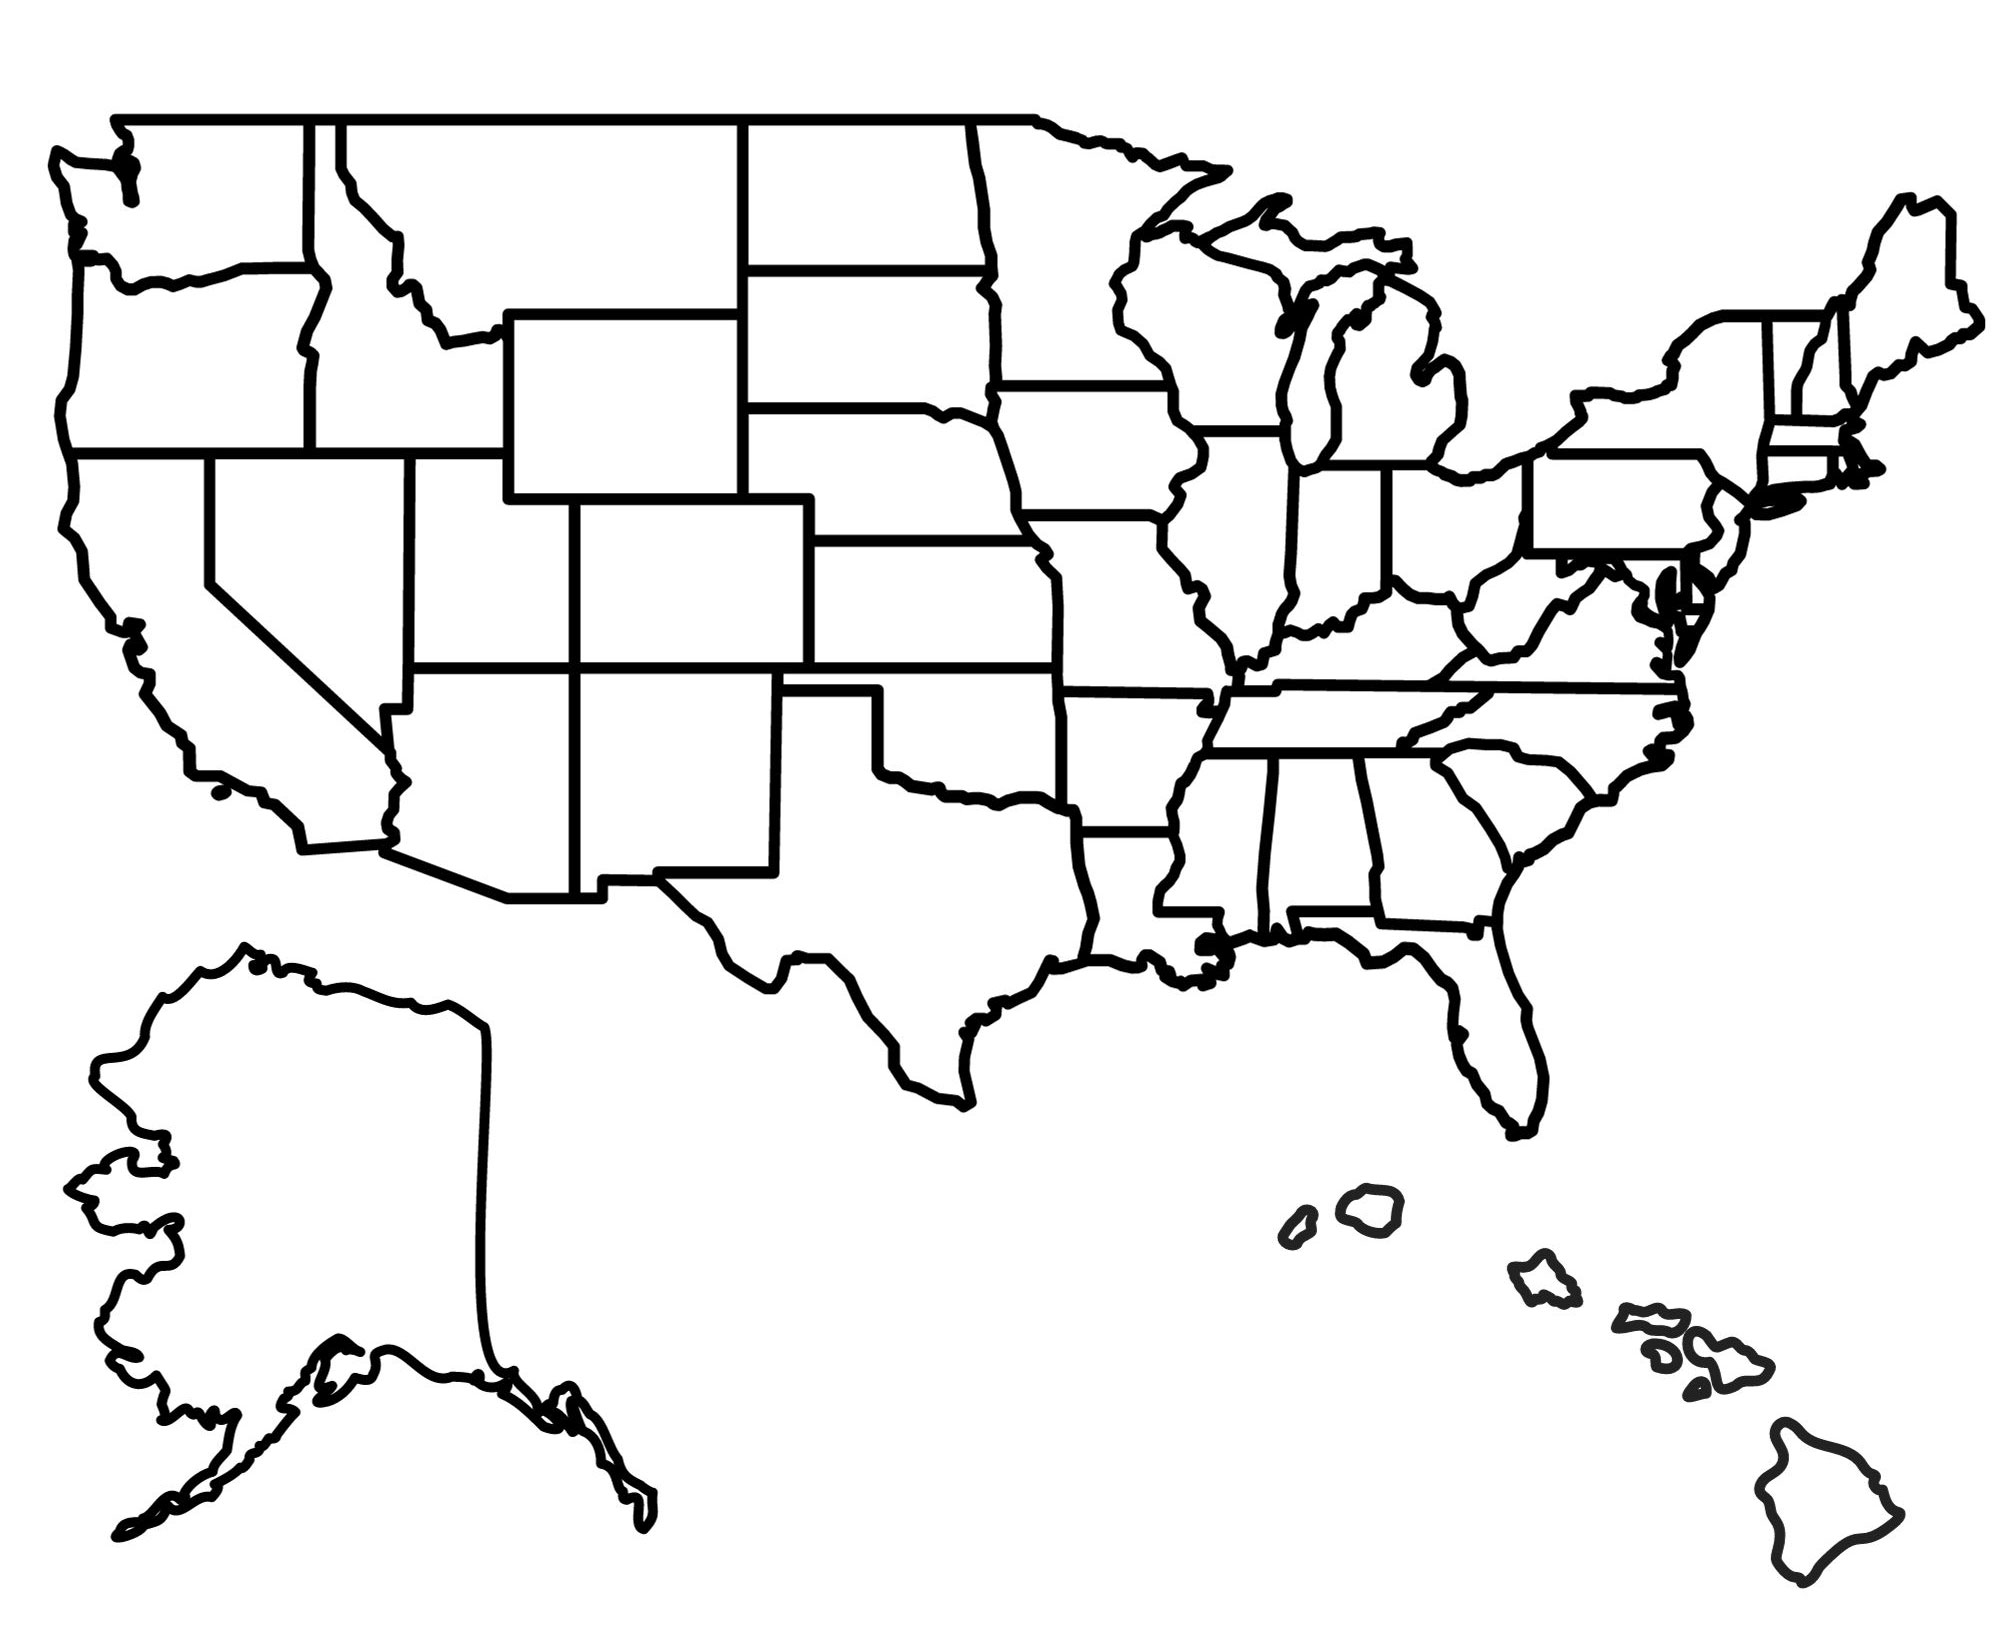 State Outlines: Blank Maps of the 50 United States - GIS Geography